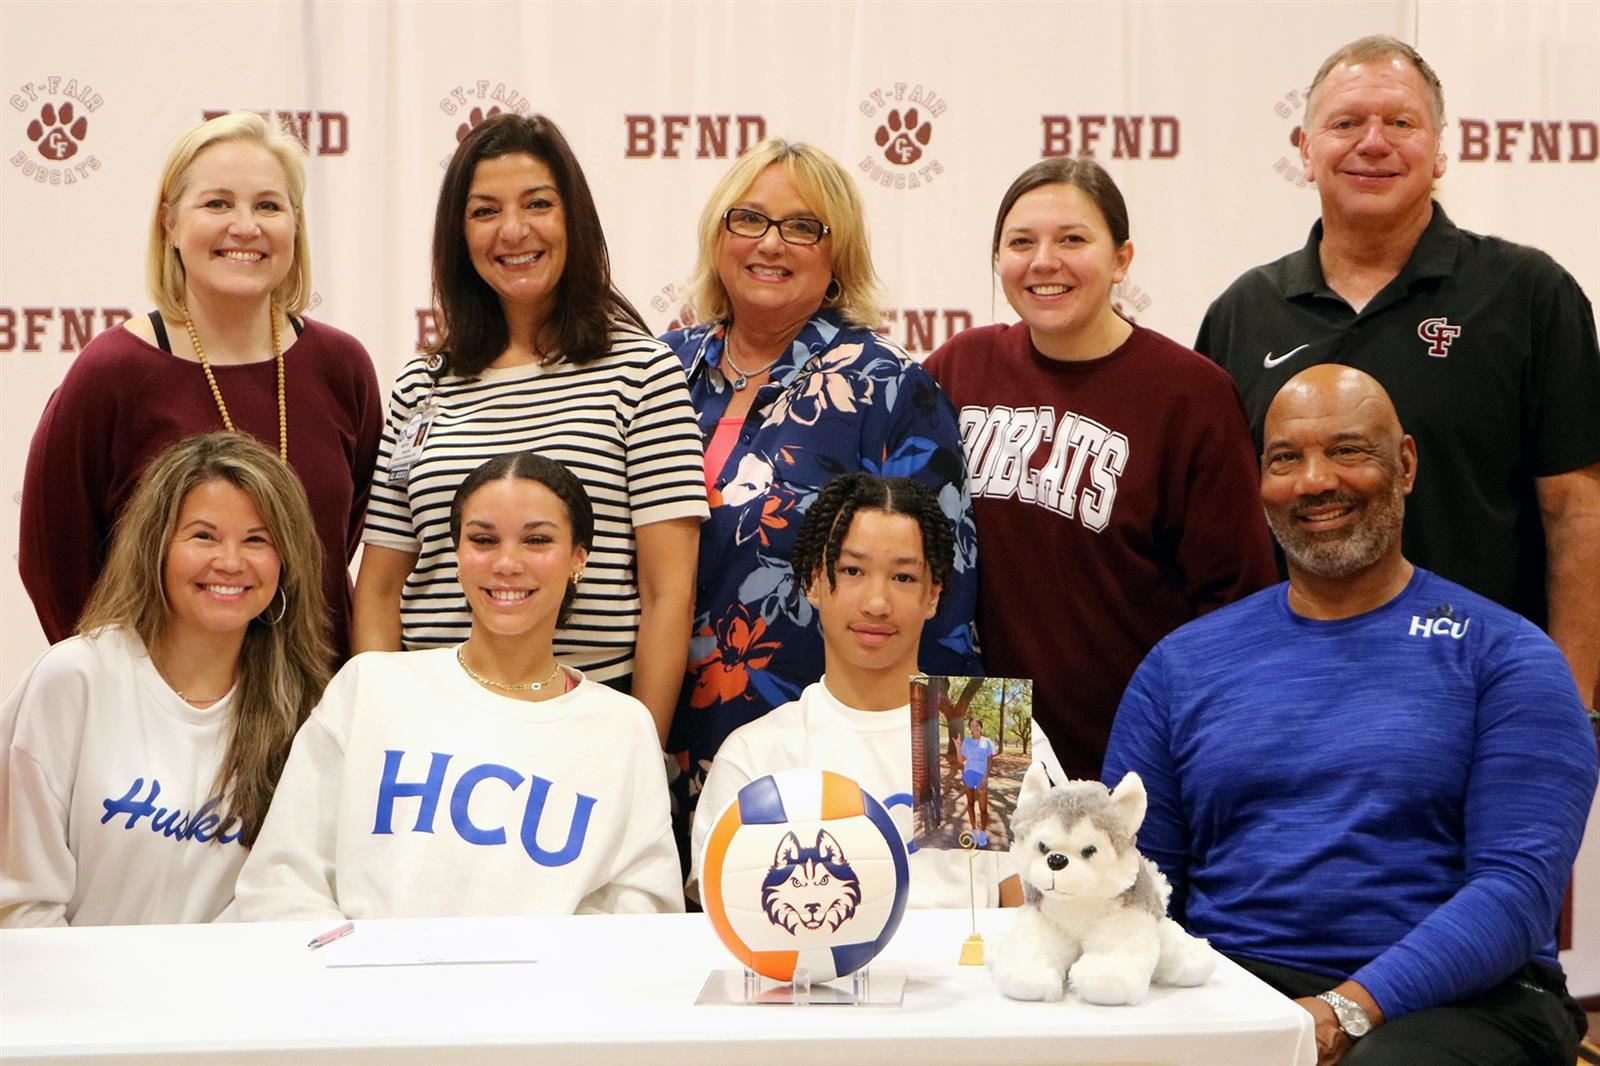 Cy-Fair High School senior Bianca Byerly, seated second from left, signed a letter of intent to play volleyball.